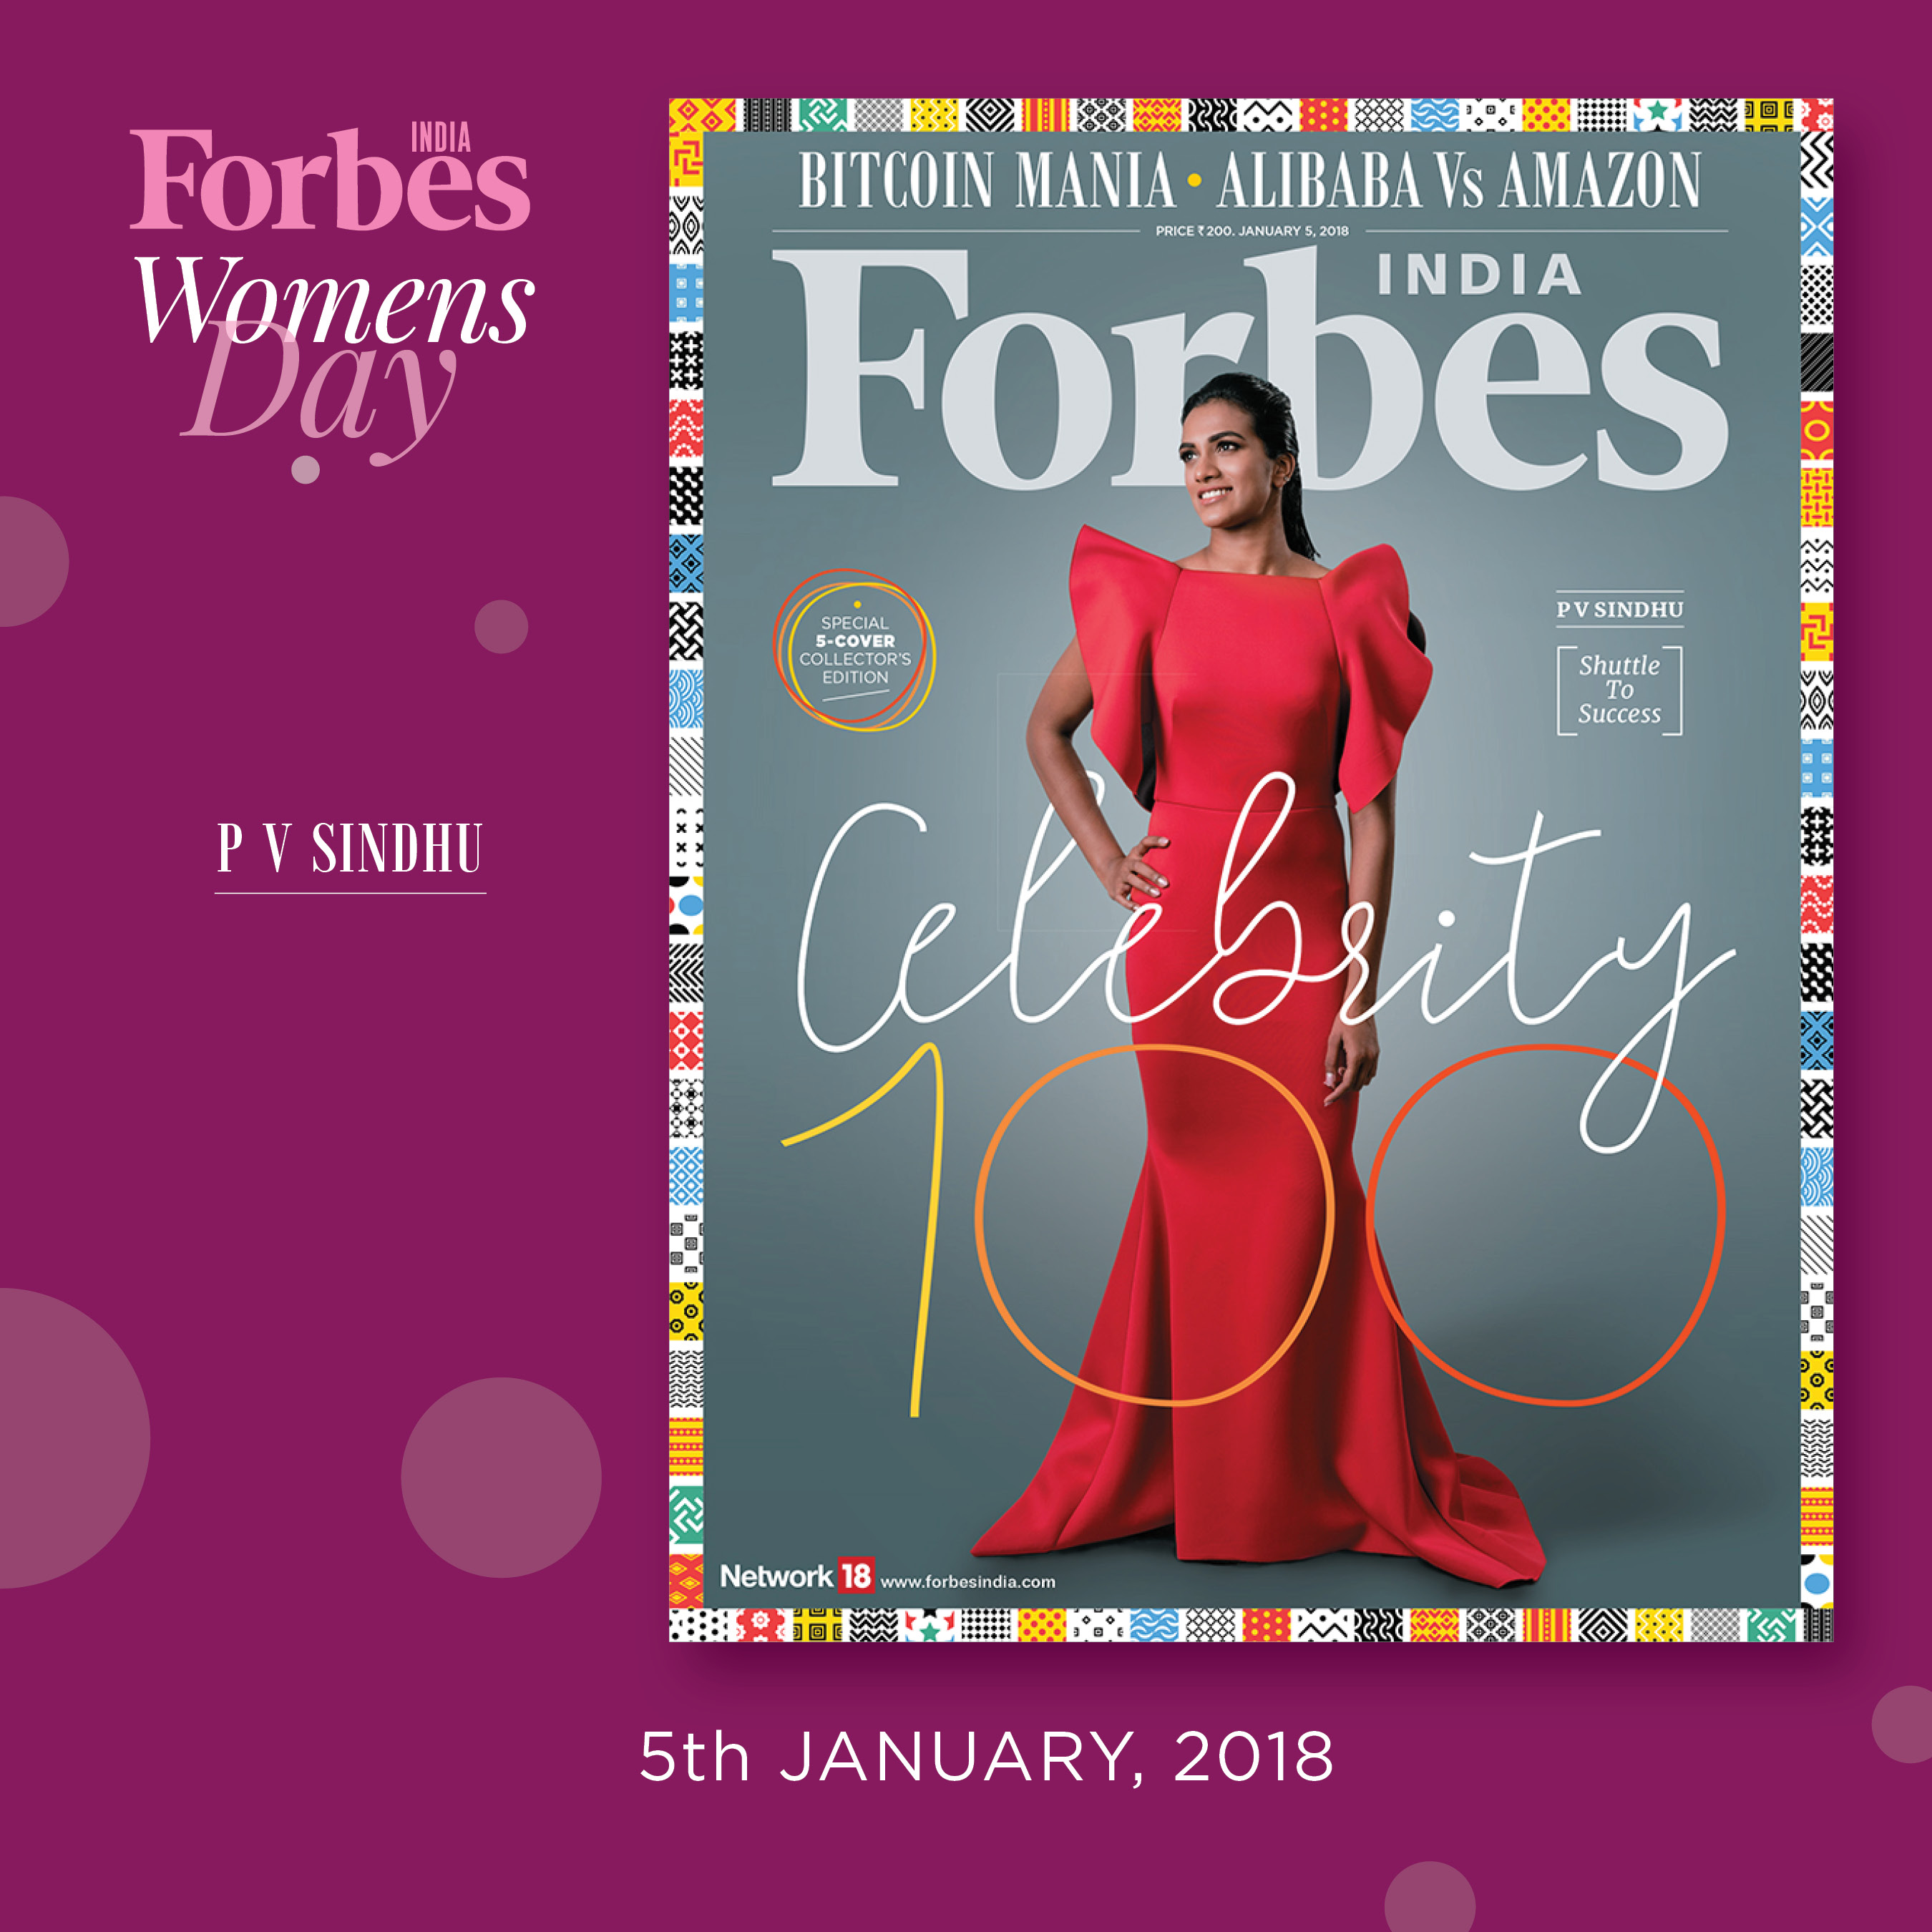 International Women's Day: Inspiring women featured on the cover of Forbes India